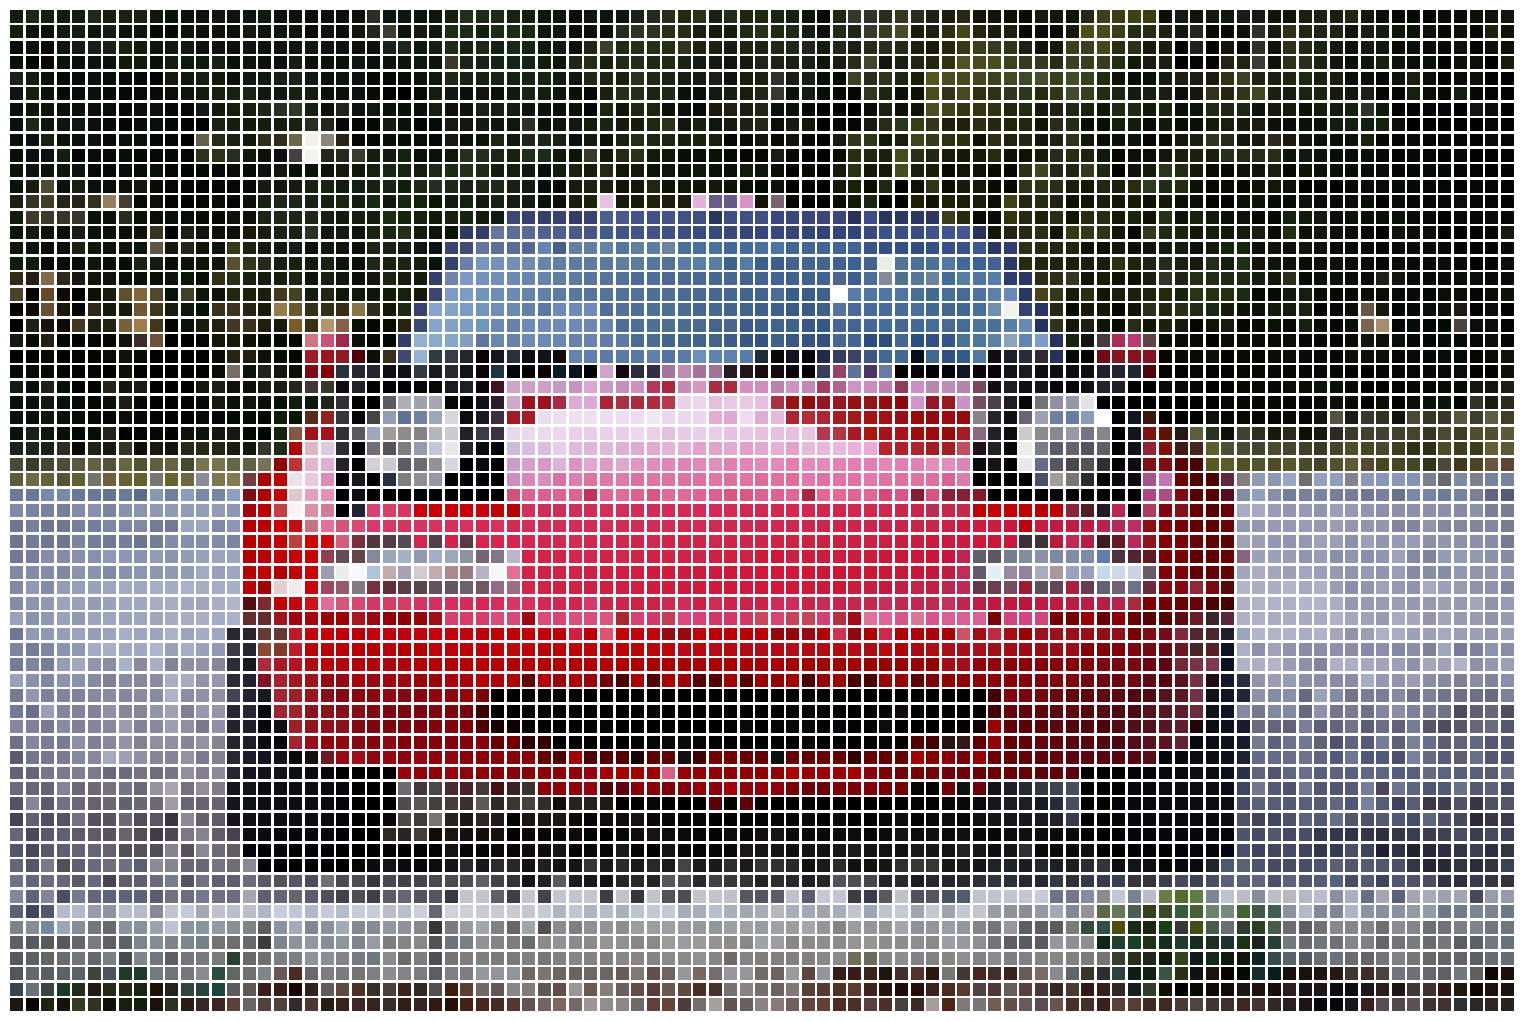 pixelated Miata without clustering